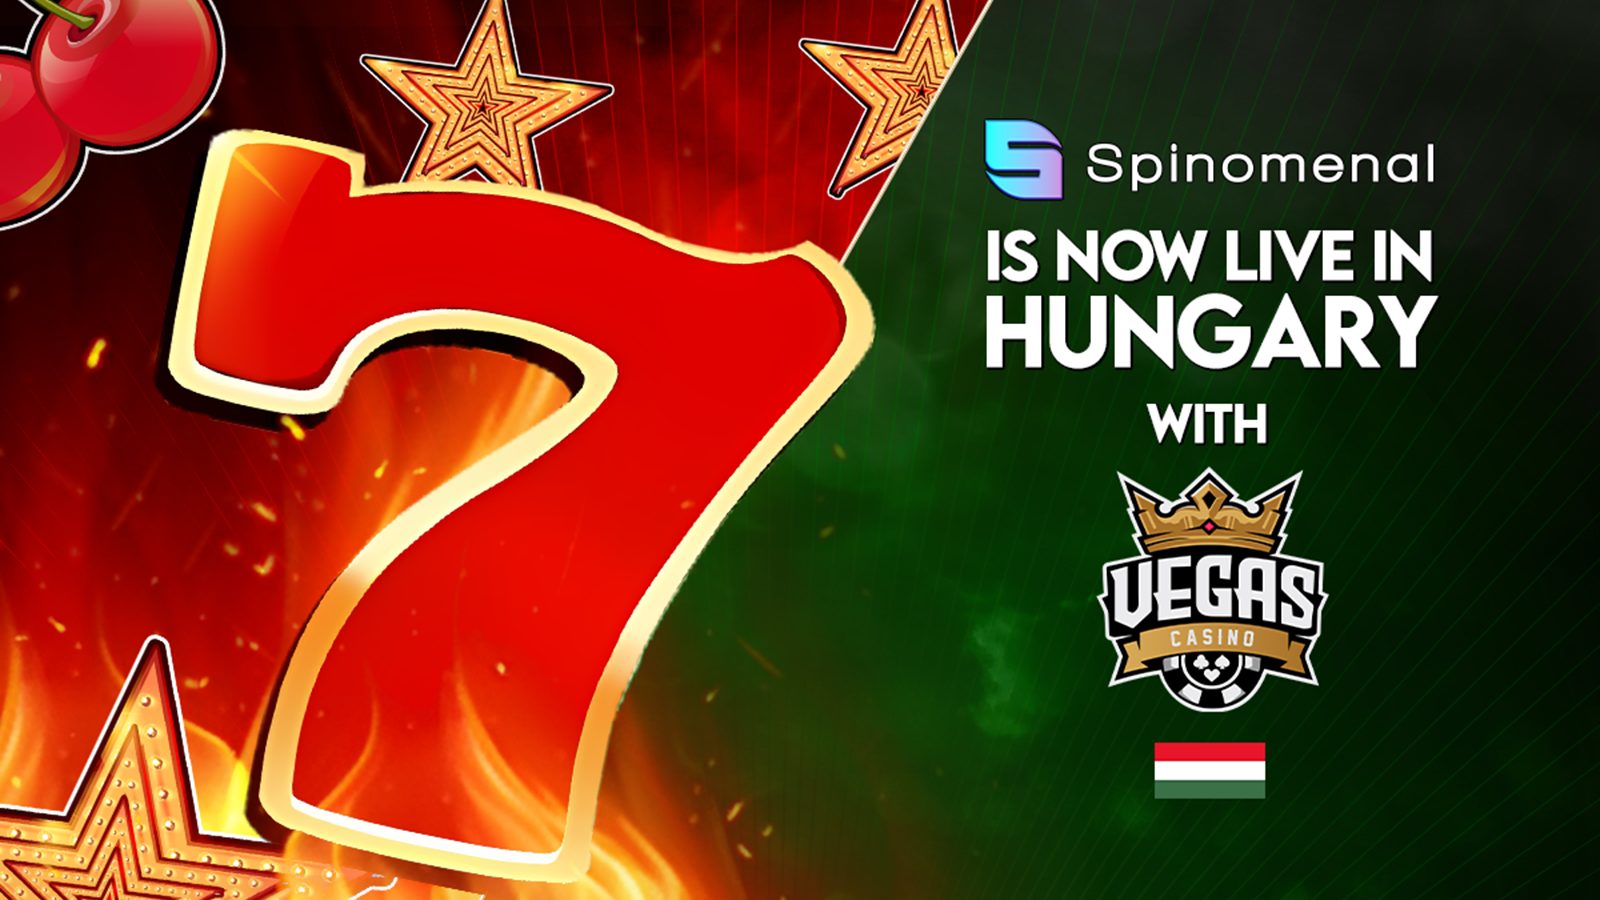 Spinomenal's Hungarian iGaming Debut